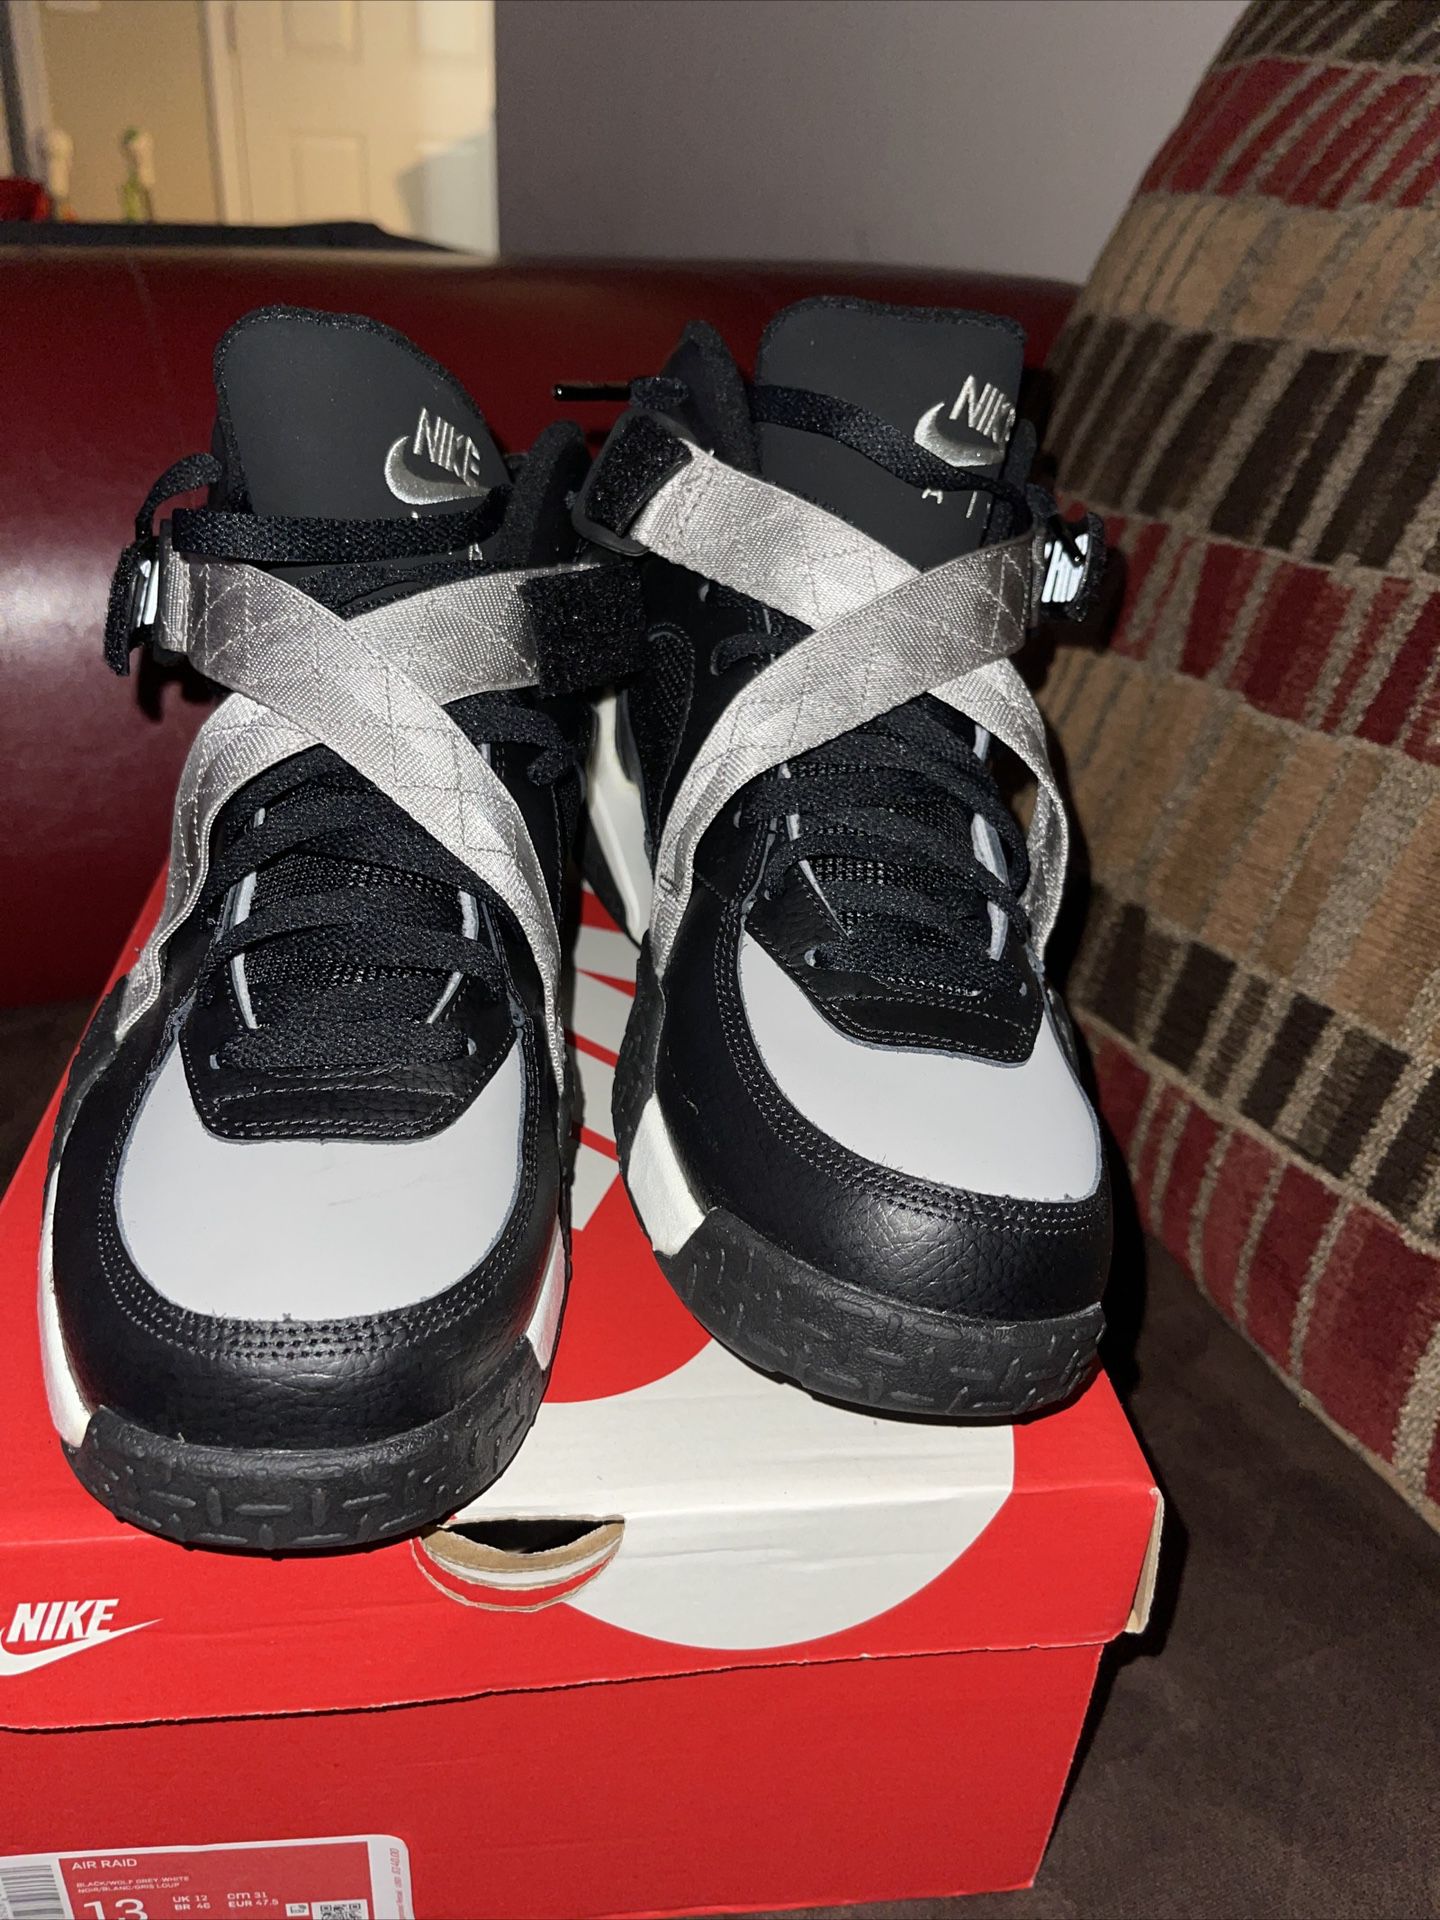 The Nike Air Raid OG Black Grey 2020 is in the sportswear collection of the  Air Raid series in the Nike brand. for Sale in Mableton, GA - OfferUp